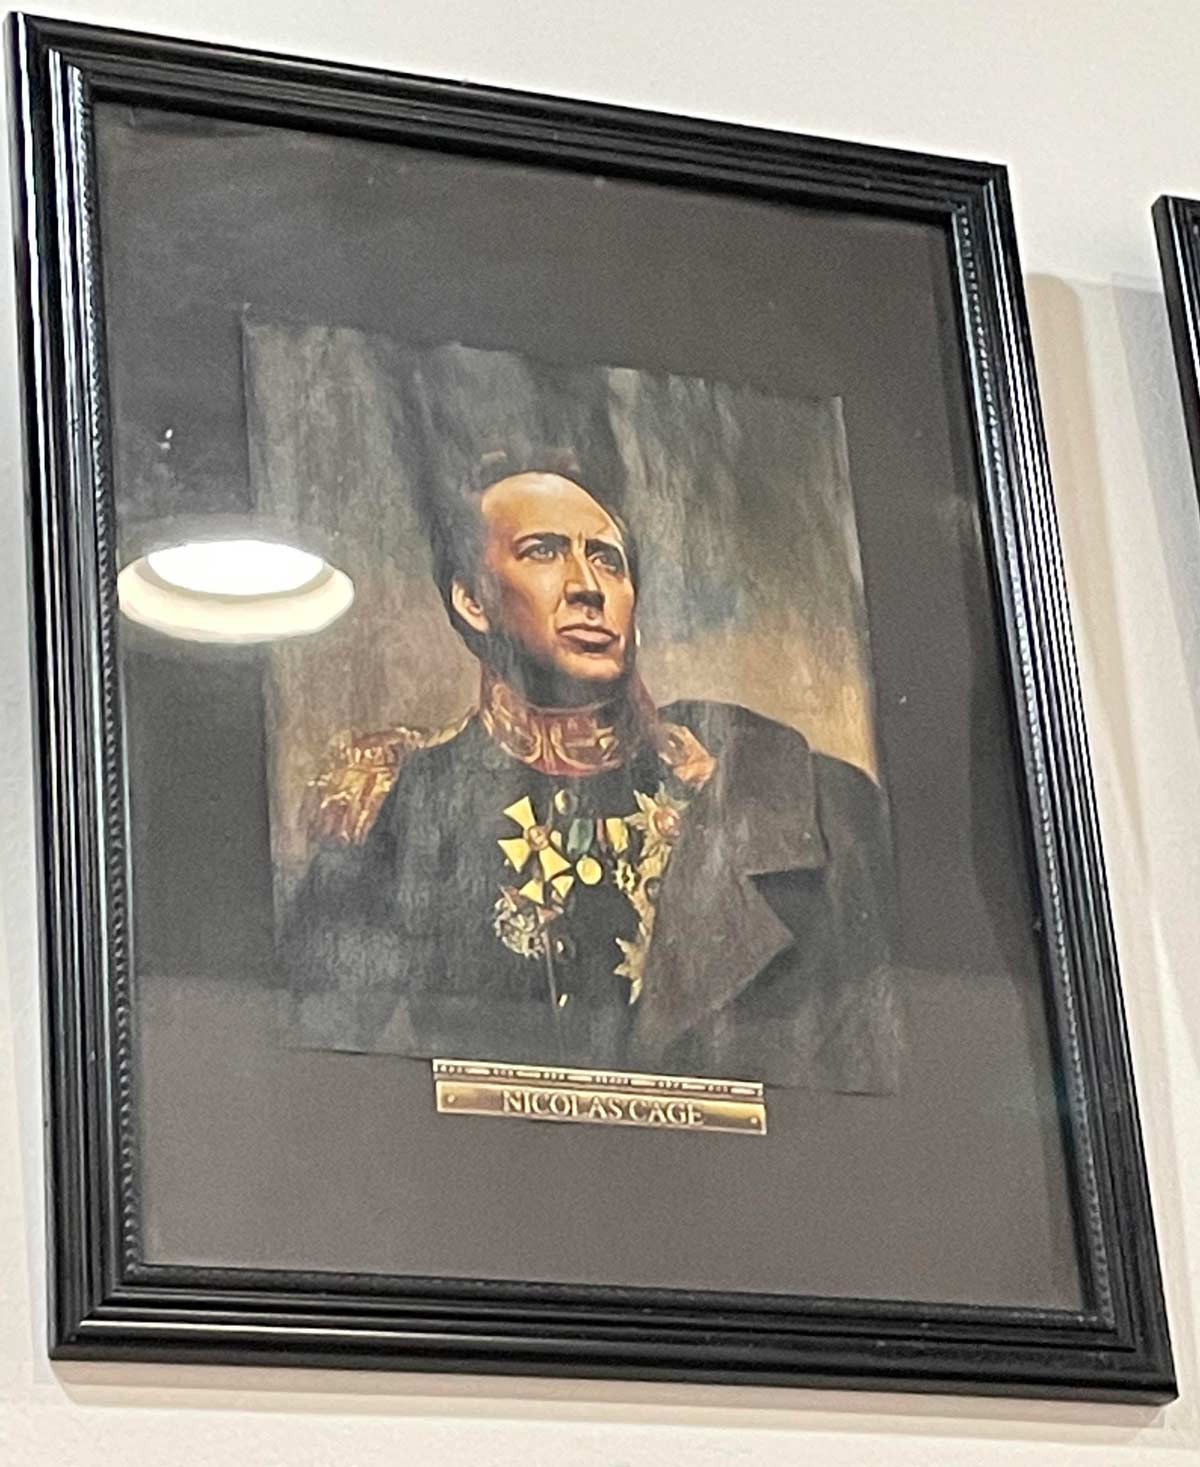 An Asian restaurant in NYC has a picture of Nic Cage in some sort of European Military uniform / regalia